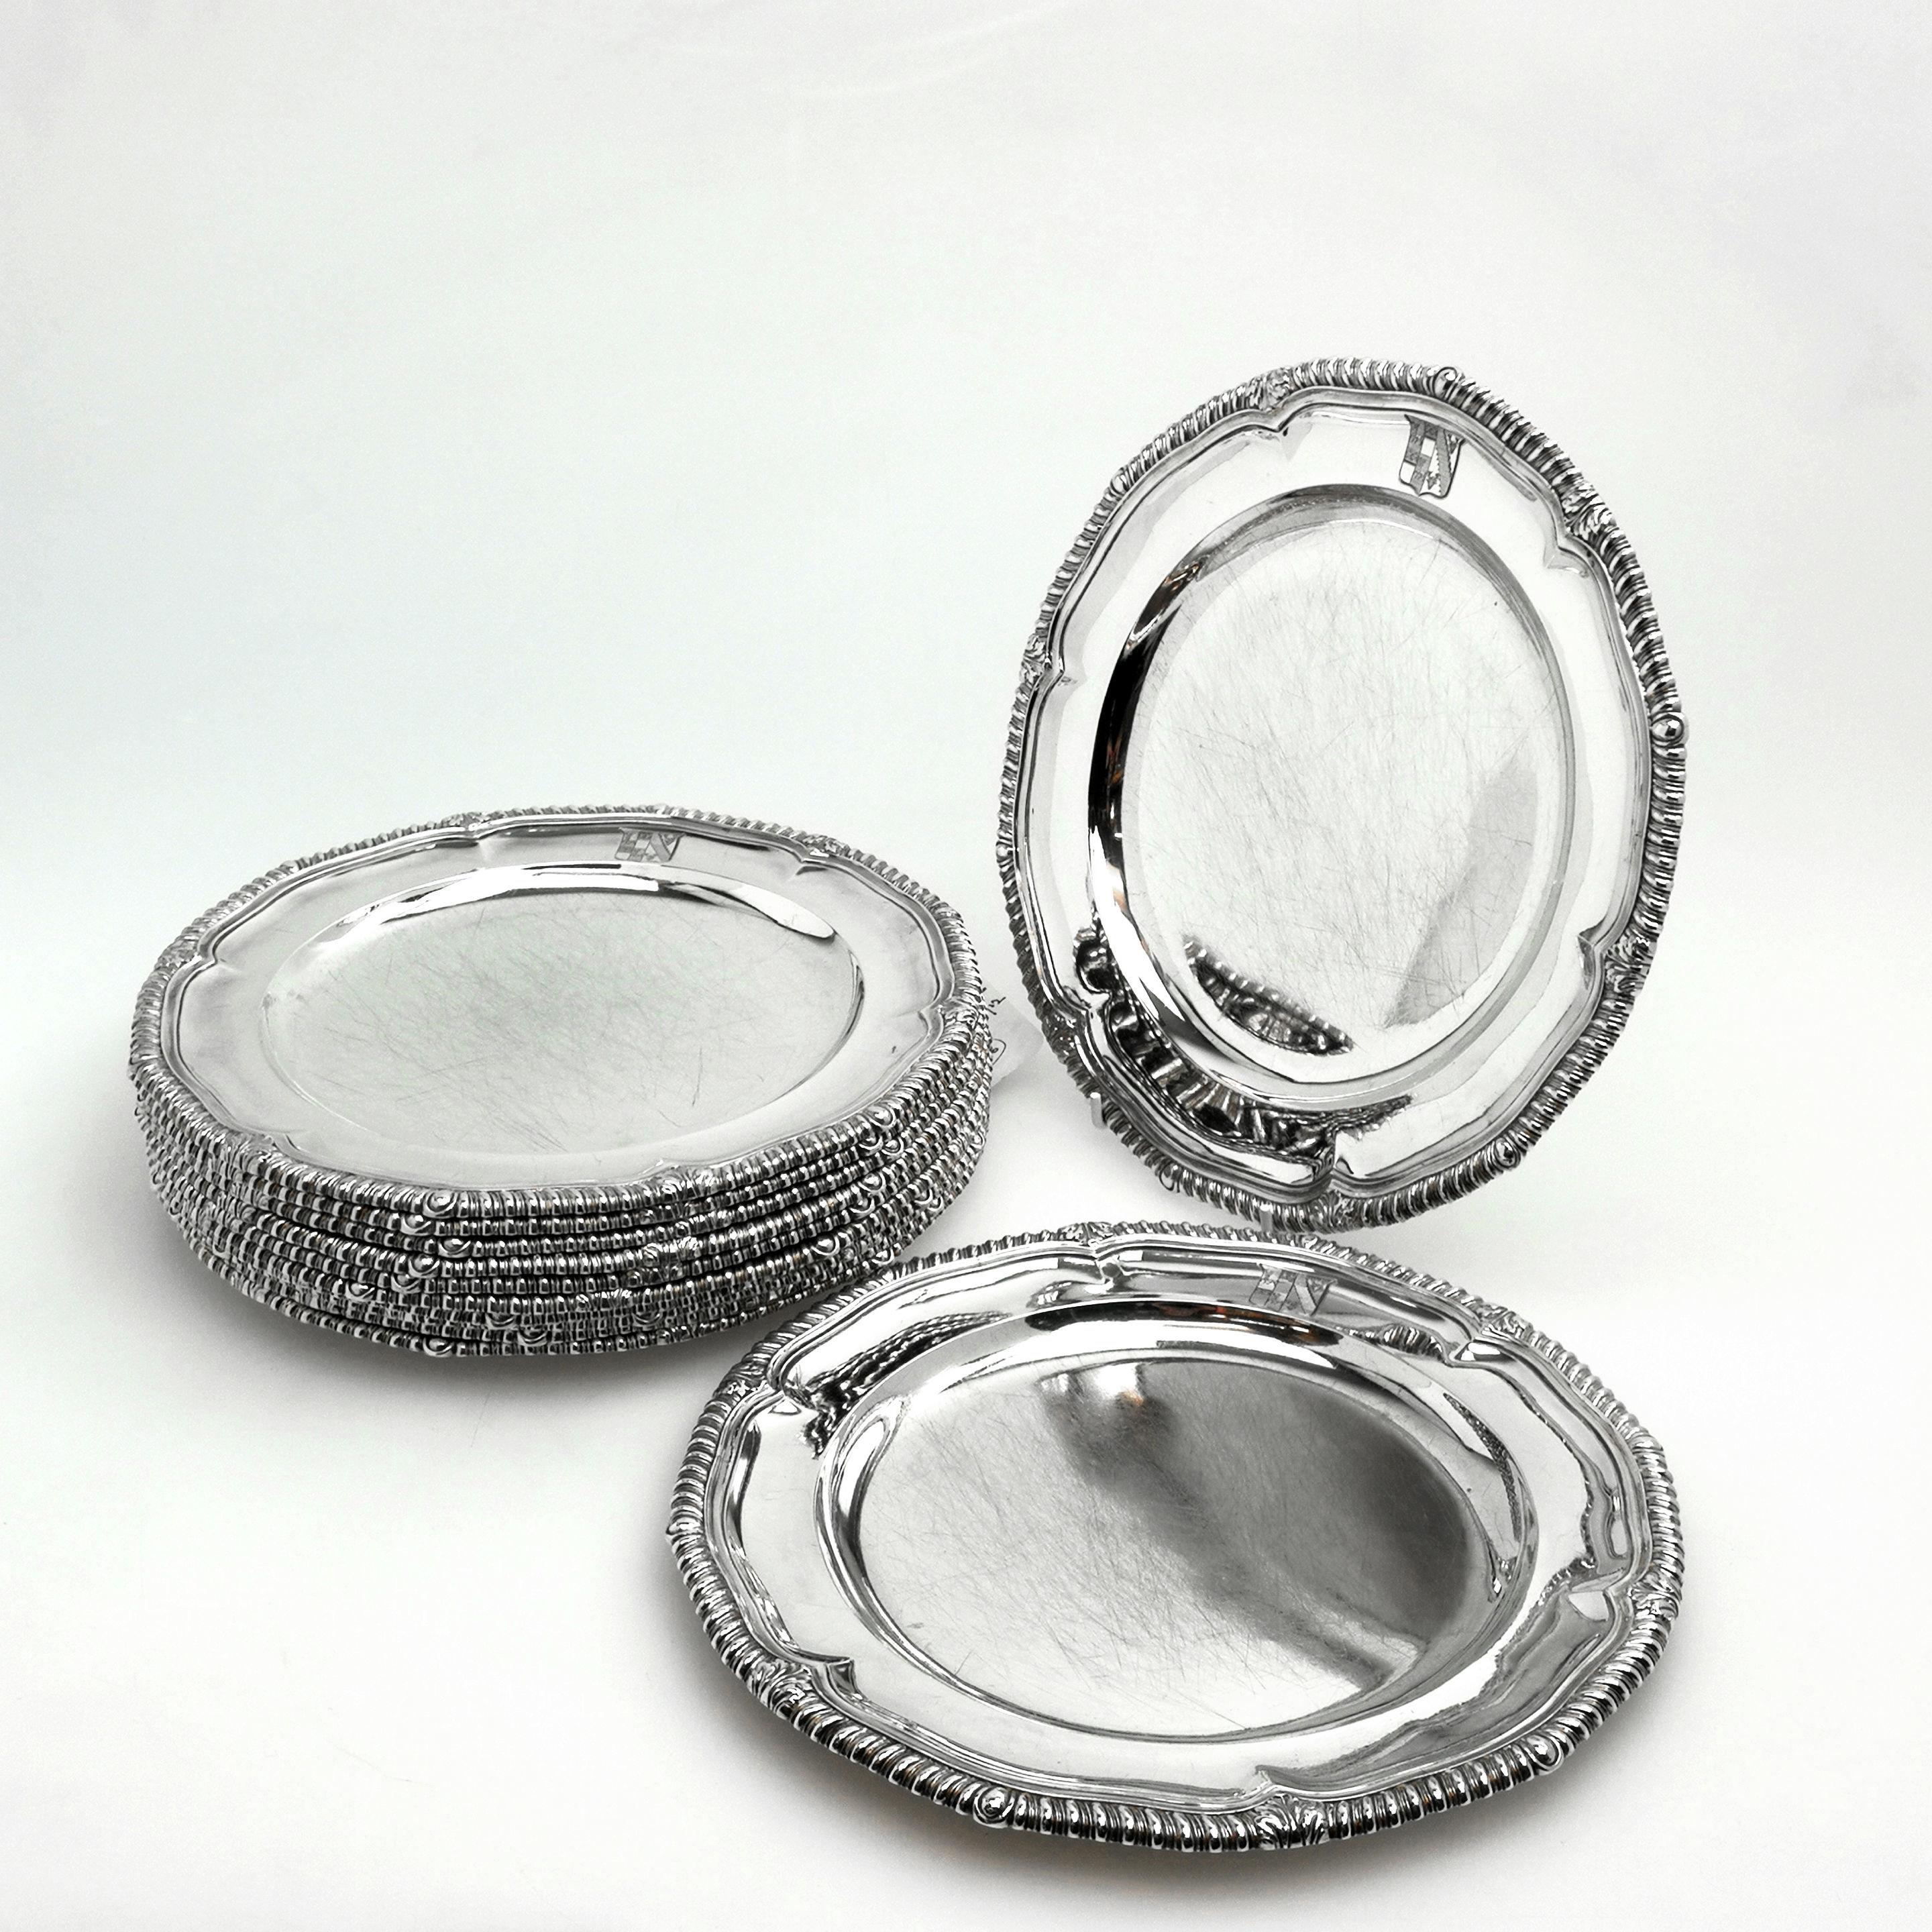 An impressive set of 12 Classic antique George III solid silver dinner plates with a traditional shaped Gadroon Pattern border. The plates each have a small engraved crest on the rim.
 
 Made in London in 1820 by Richard Sibley.
 
 Approx. Total